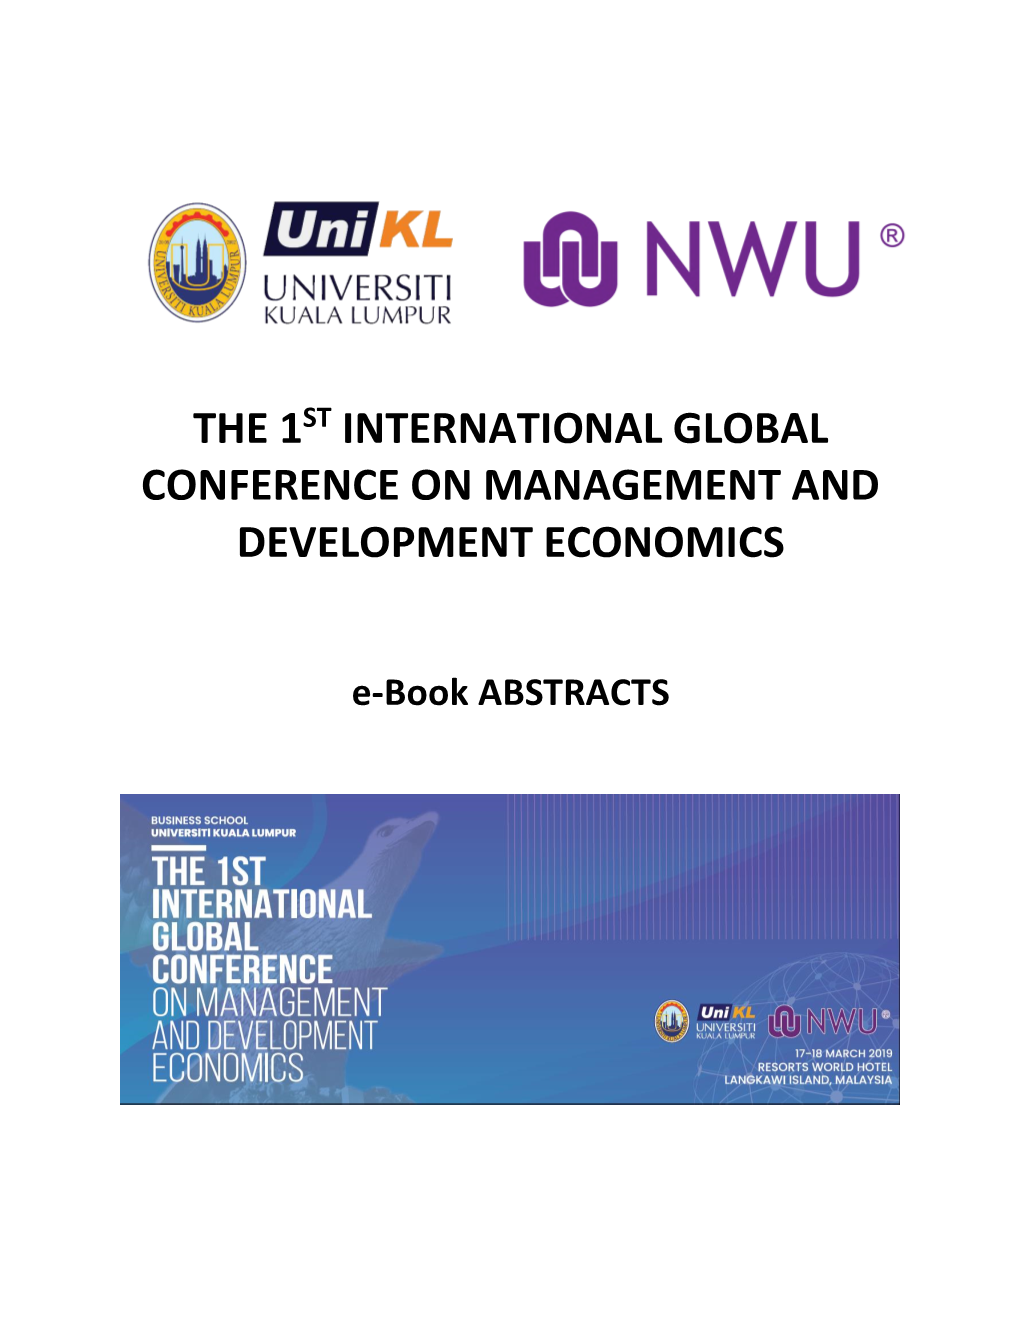 The 1St International Global Conference on Management and Development Economics